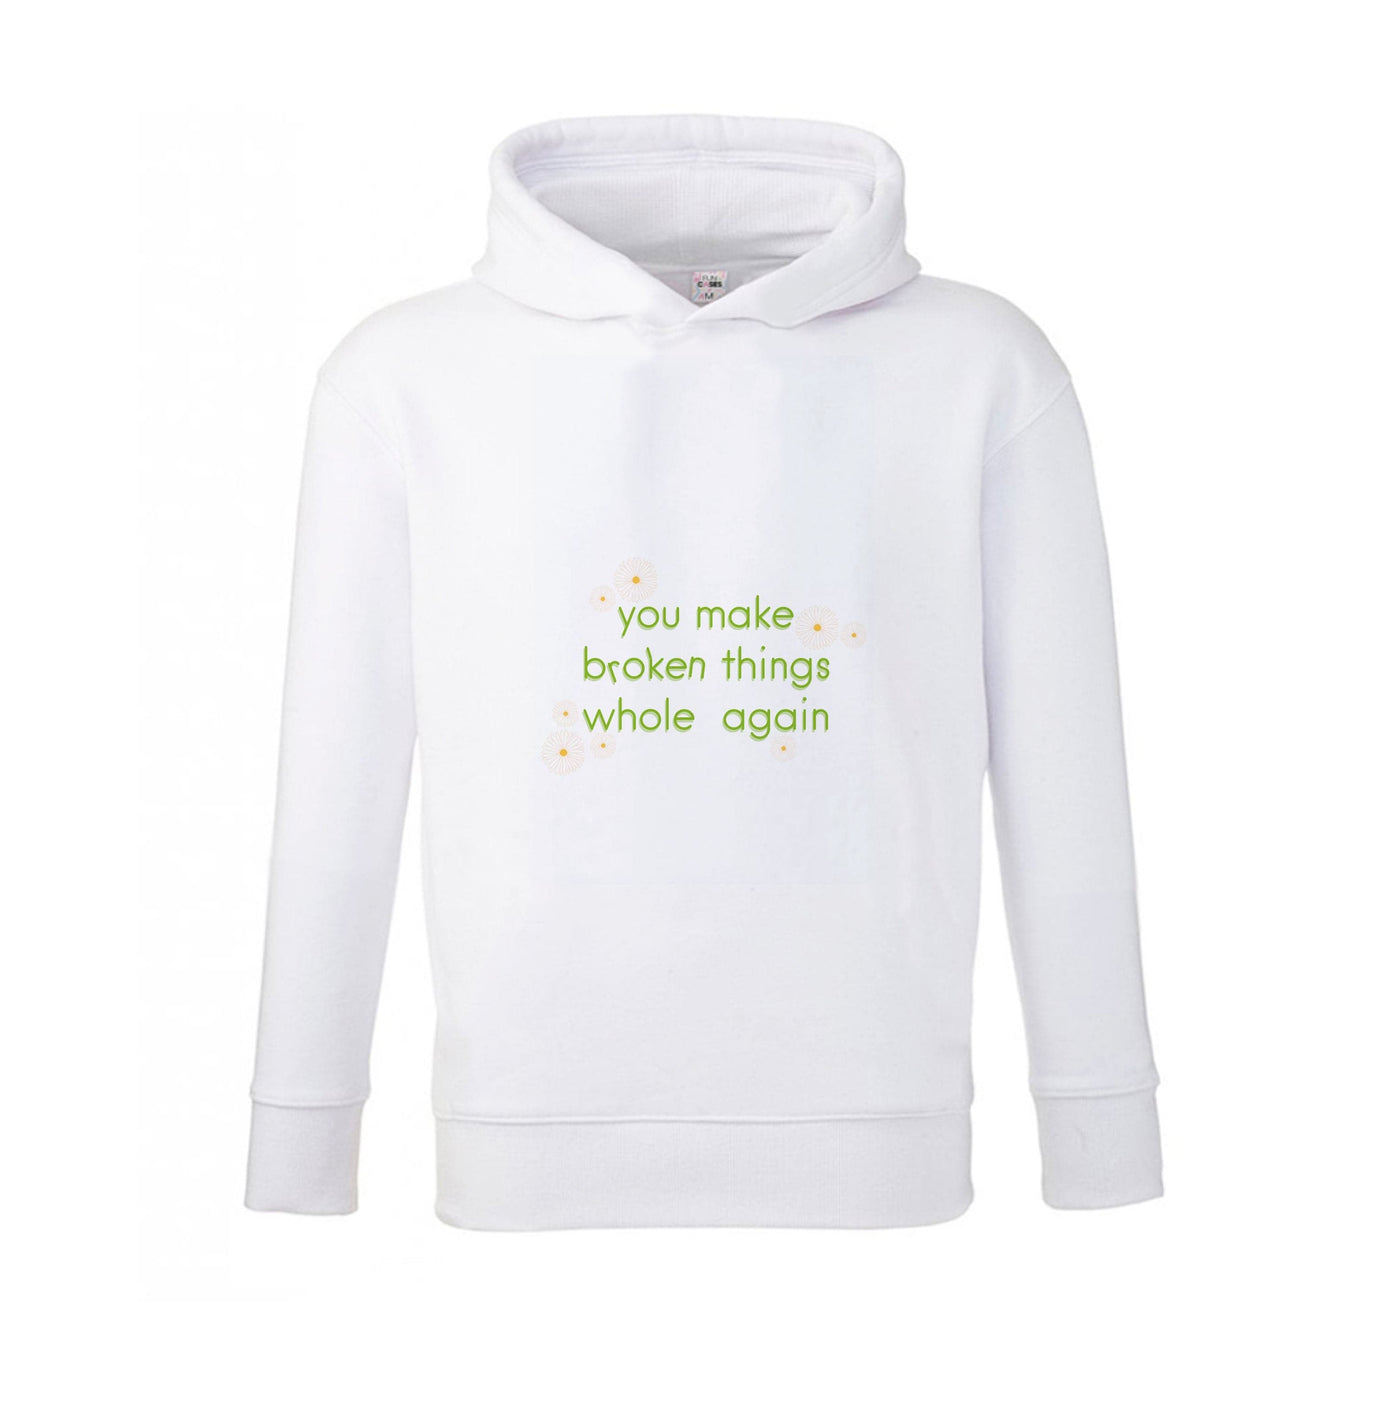 You Make Broken Things Whole Again - The Things We Never Got Over Kids Hoodie